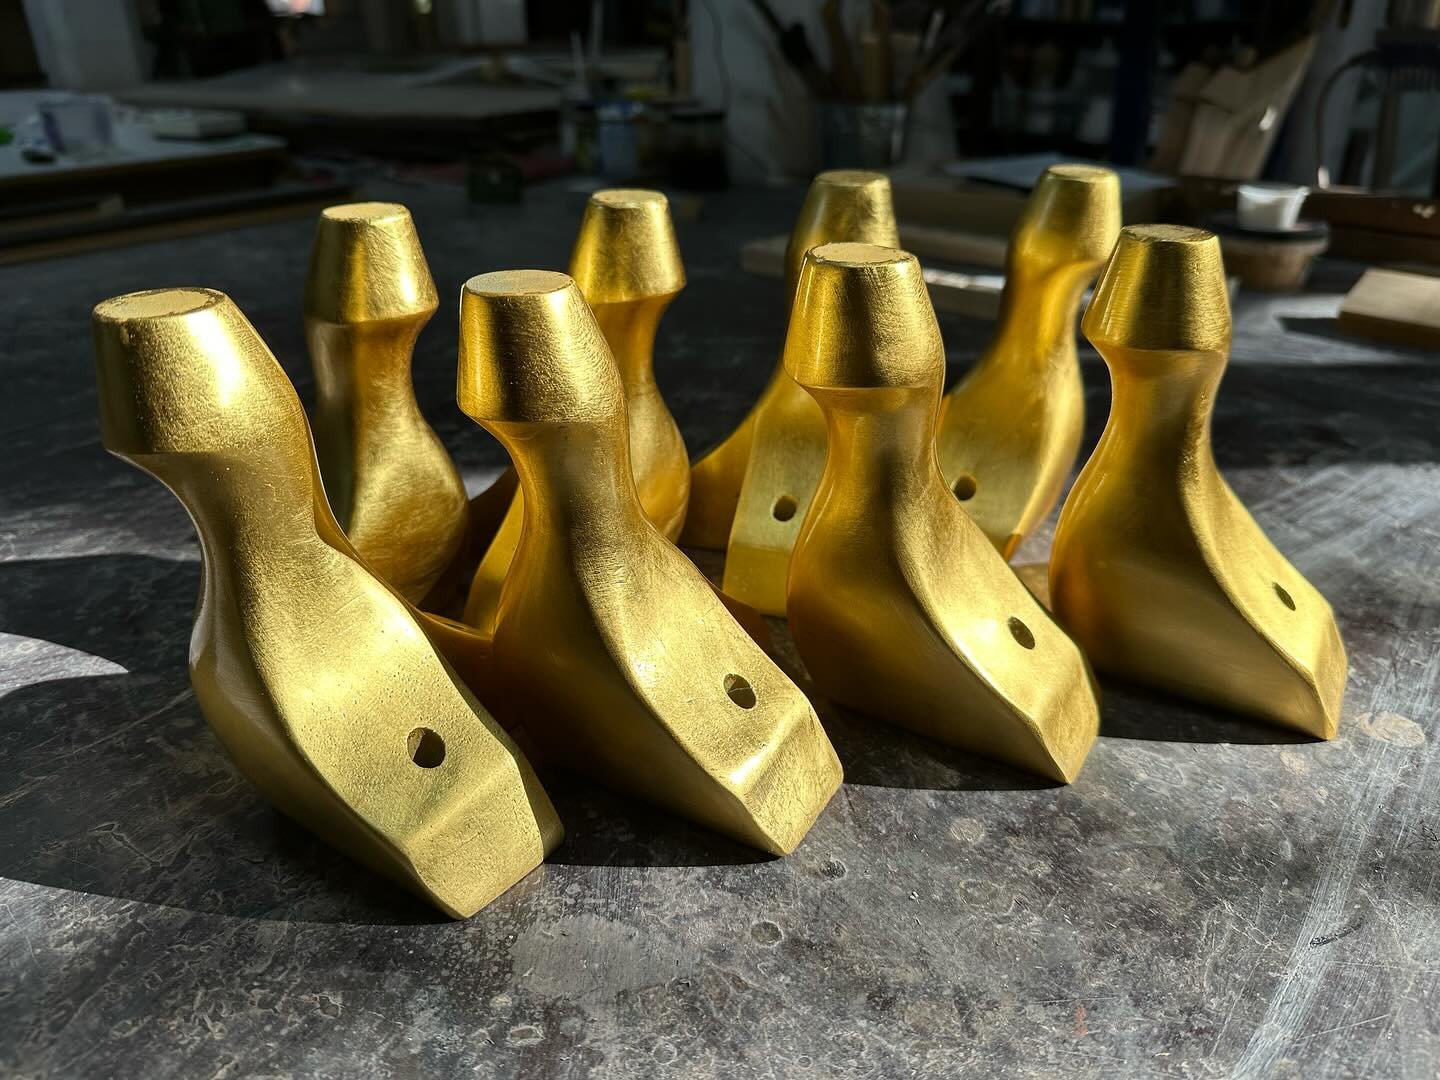 Mixing it up a little and gilding some chair legs for a client. Looks like a flock of gold ducks. 🦆 #framingfabulous #gildingbrisbane #brisbanegilding #goldleaf #gilded